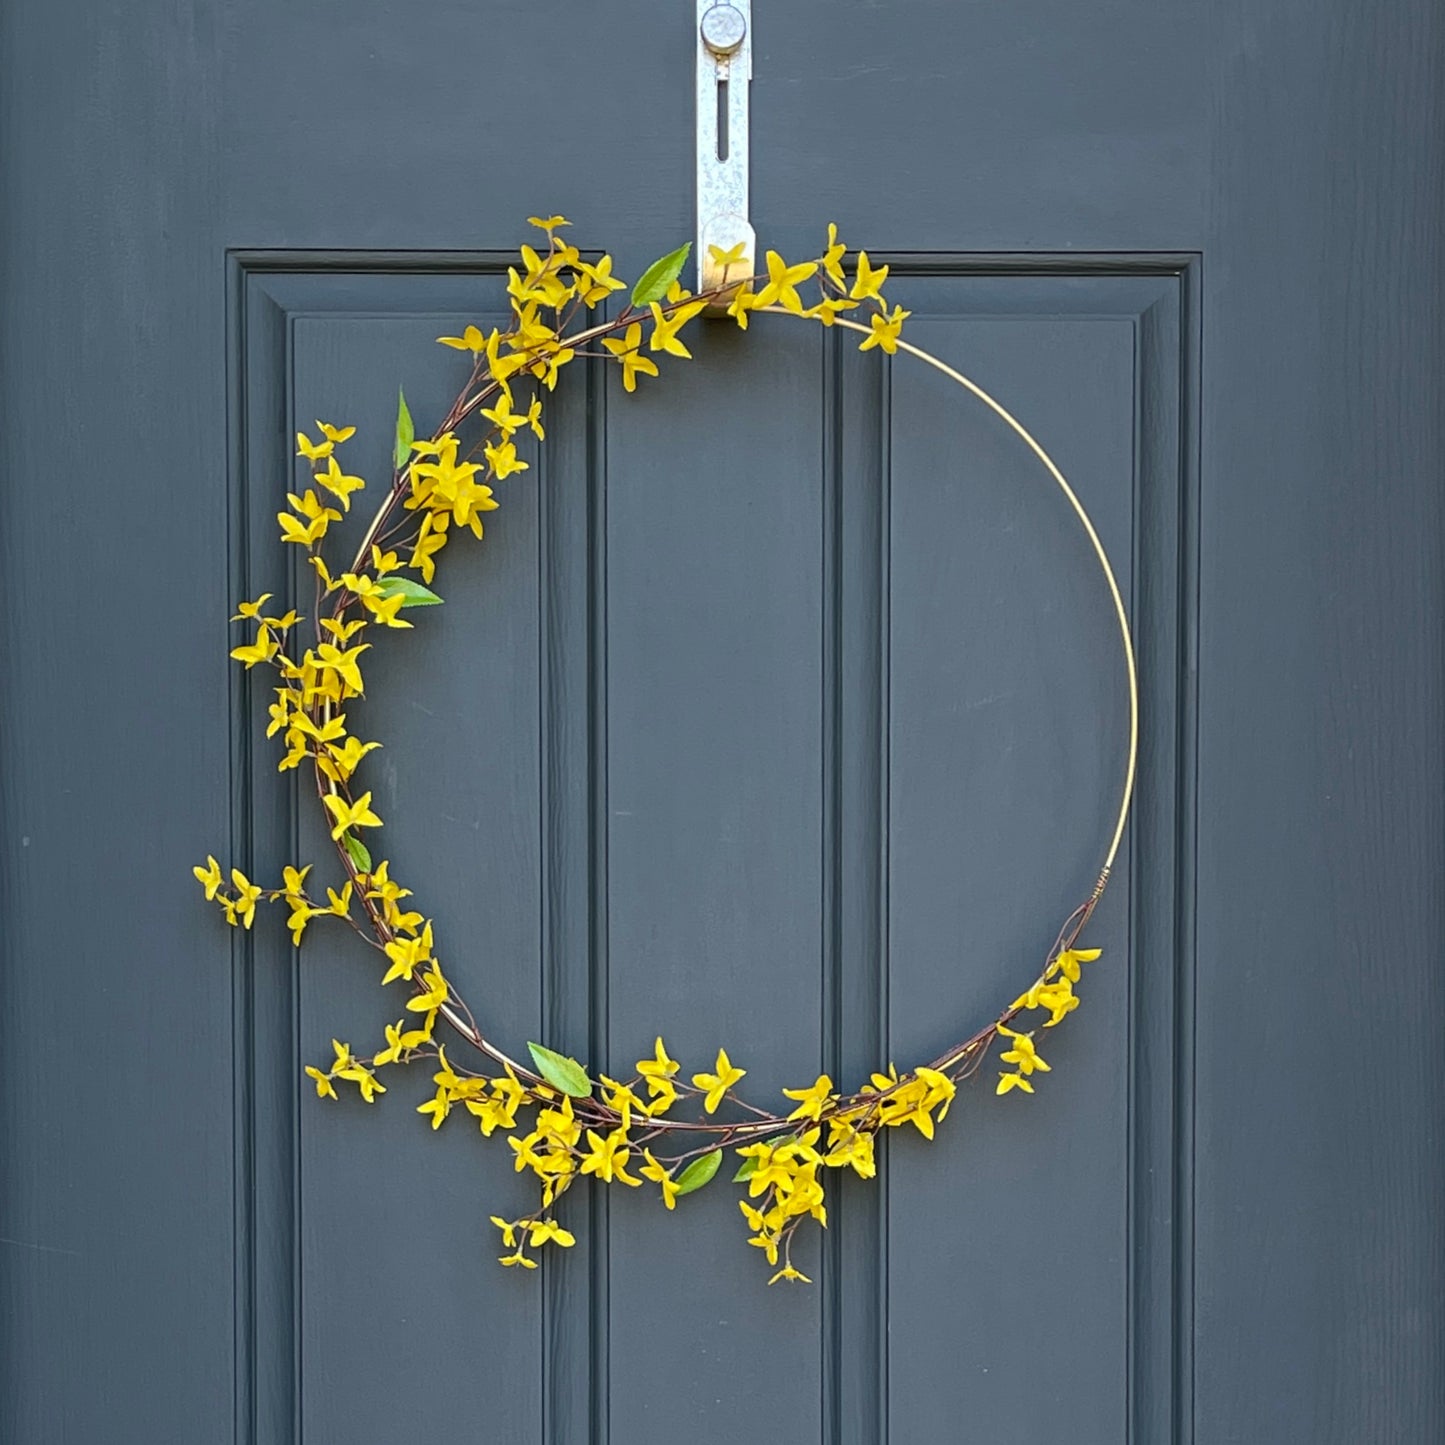 24" matte gold metal hoop with branches of yellow forsythia stems. Stems are attached with gold floral wire. Wreath is hanging from a gold wreath hanger on a dark navy front door.